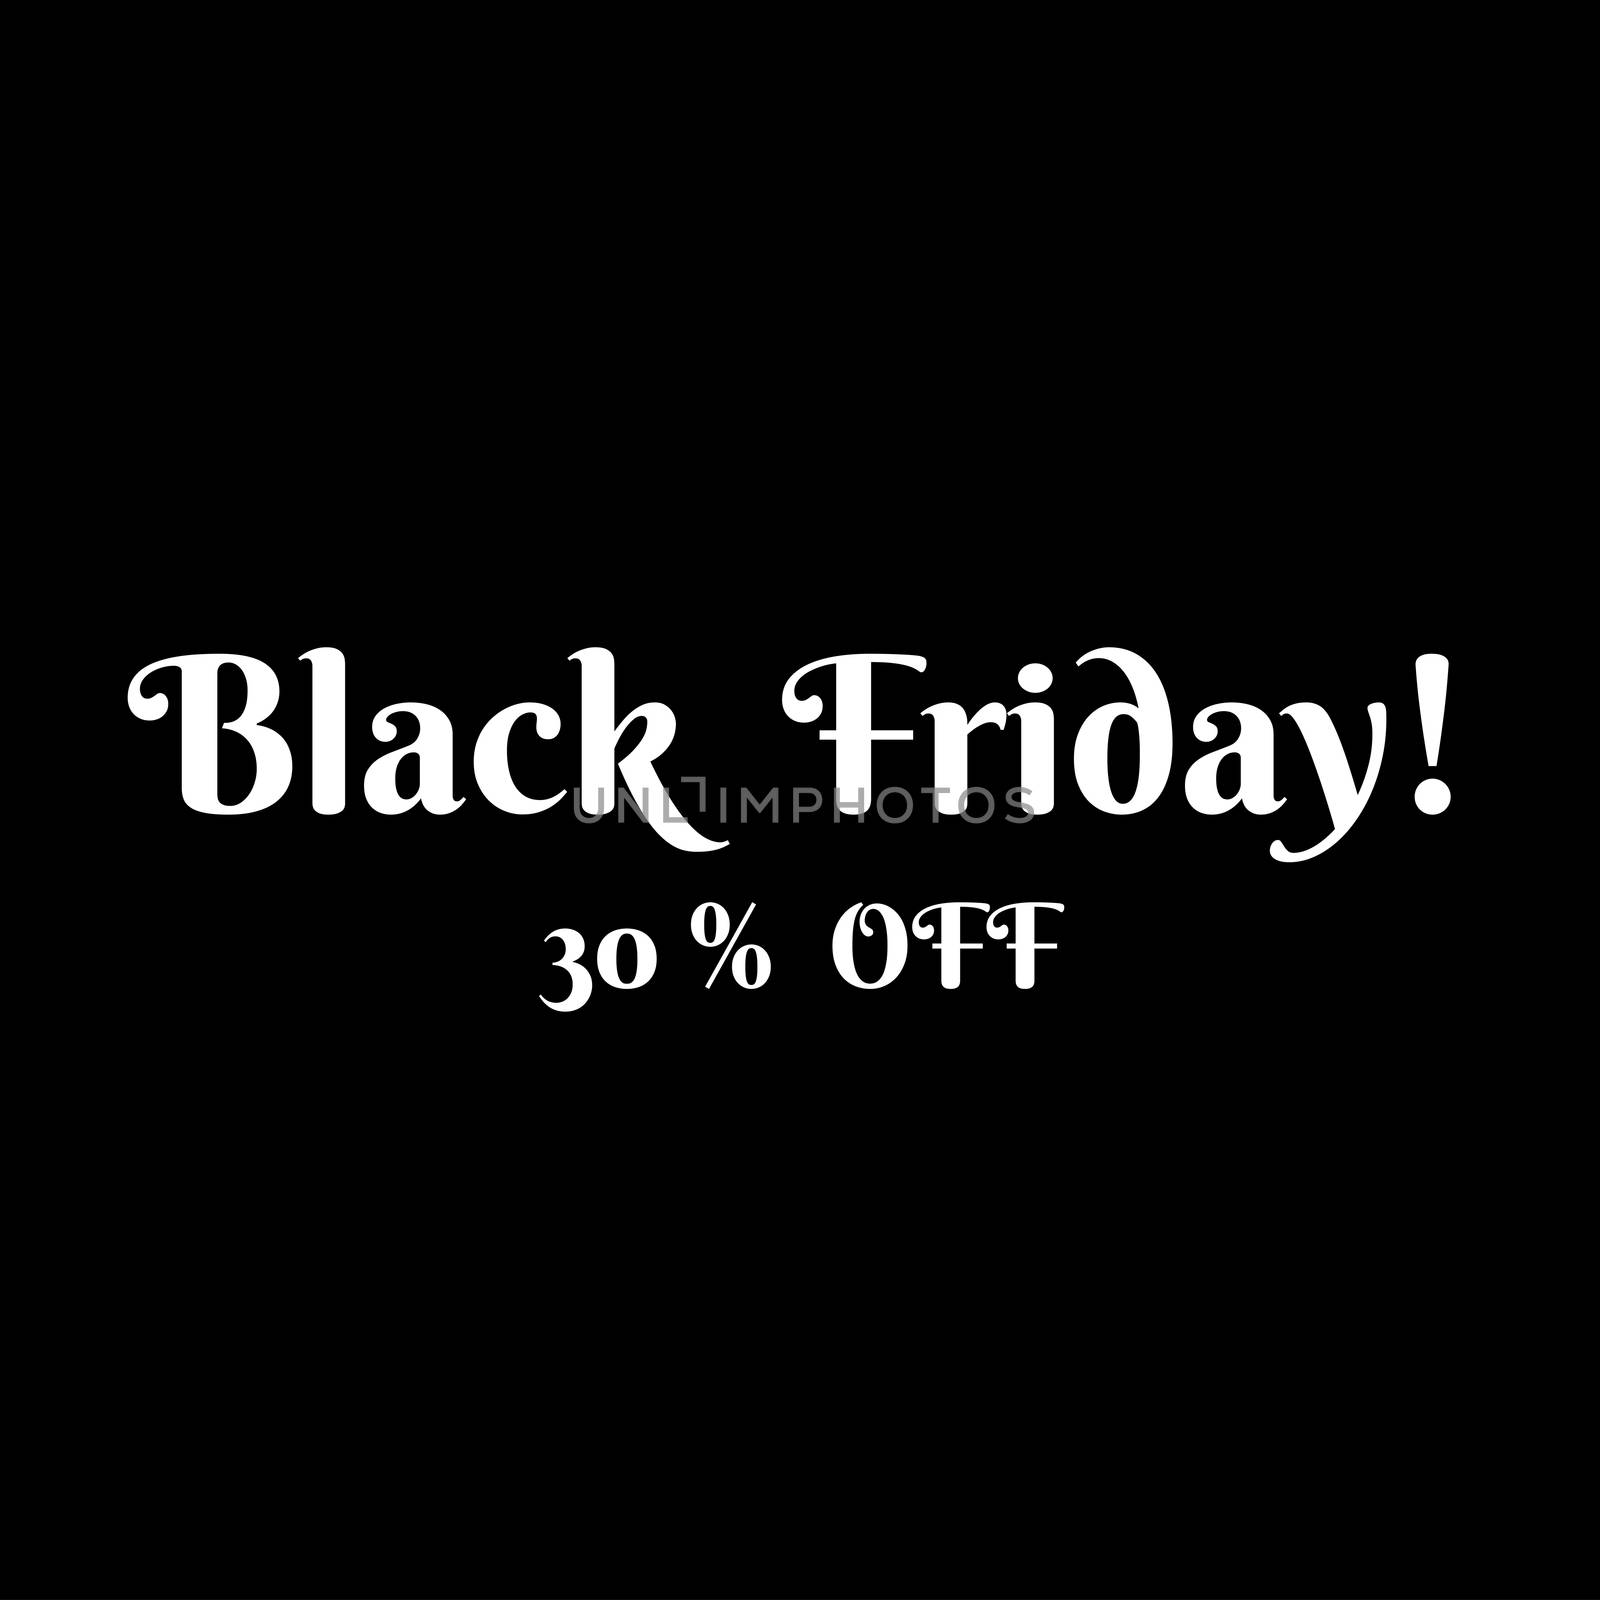 Delicious black and white design. Black Friday 30 % OFF eshop vintage hand-drawn sign!